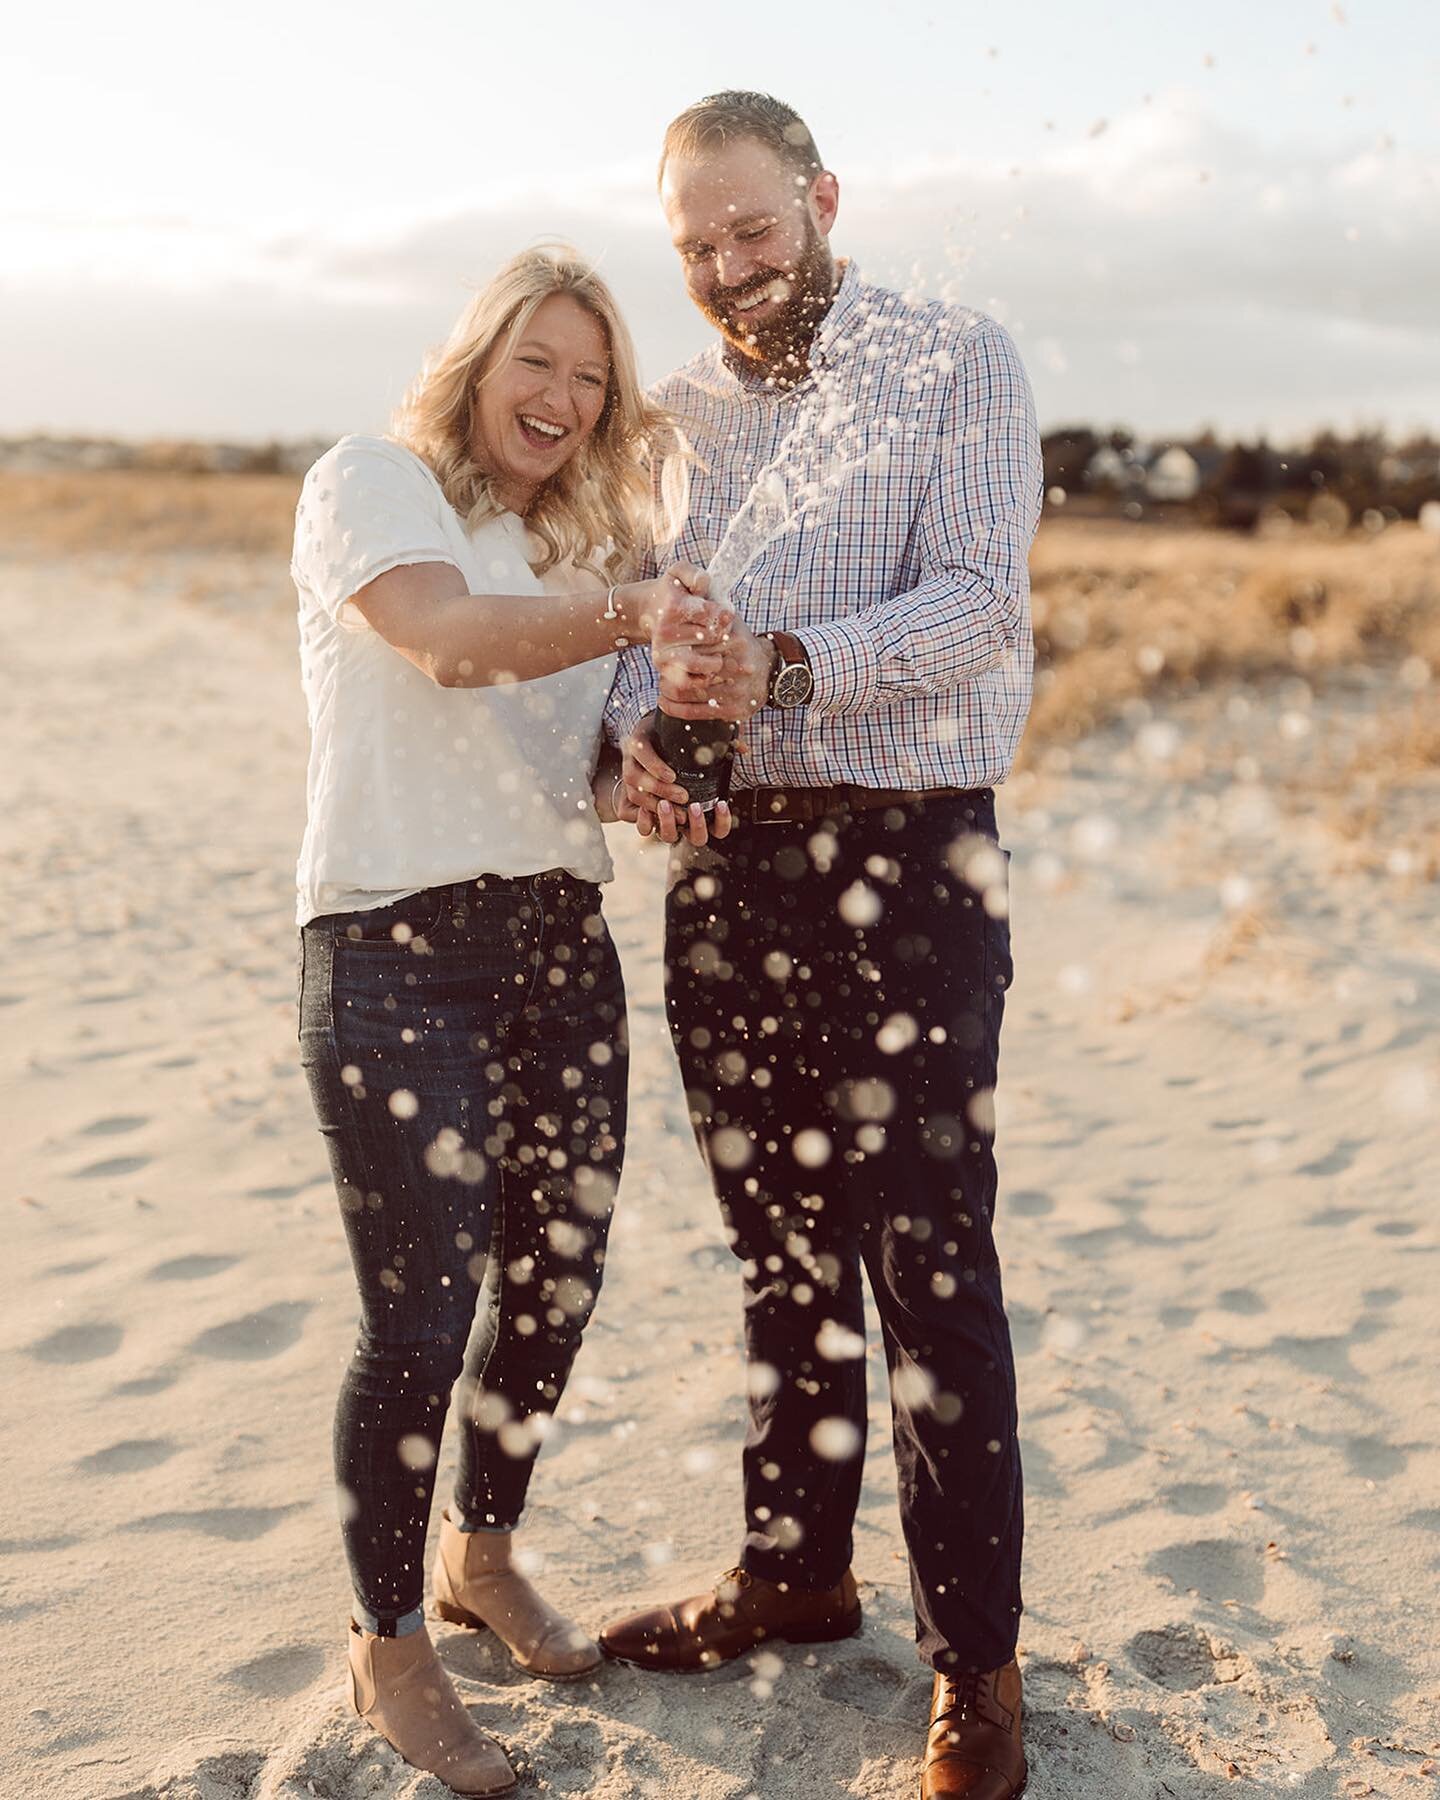 Cheers to Sam and Lexi! First engagement session of 2021 is in the books! 🥂